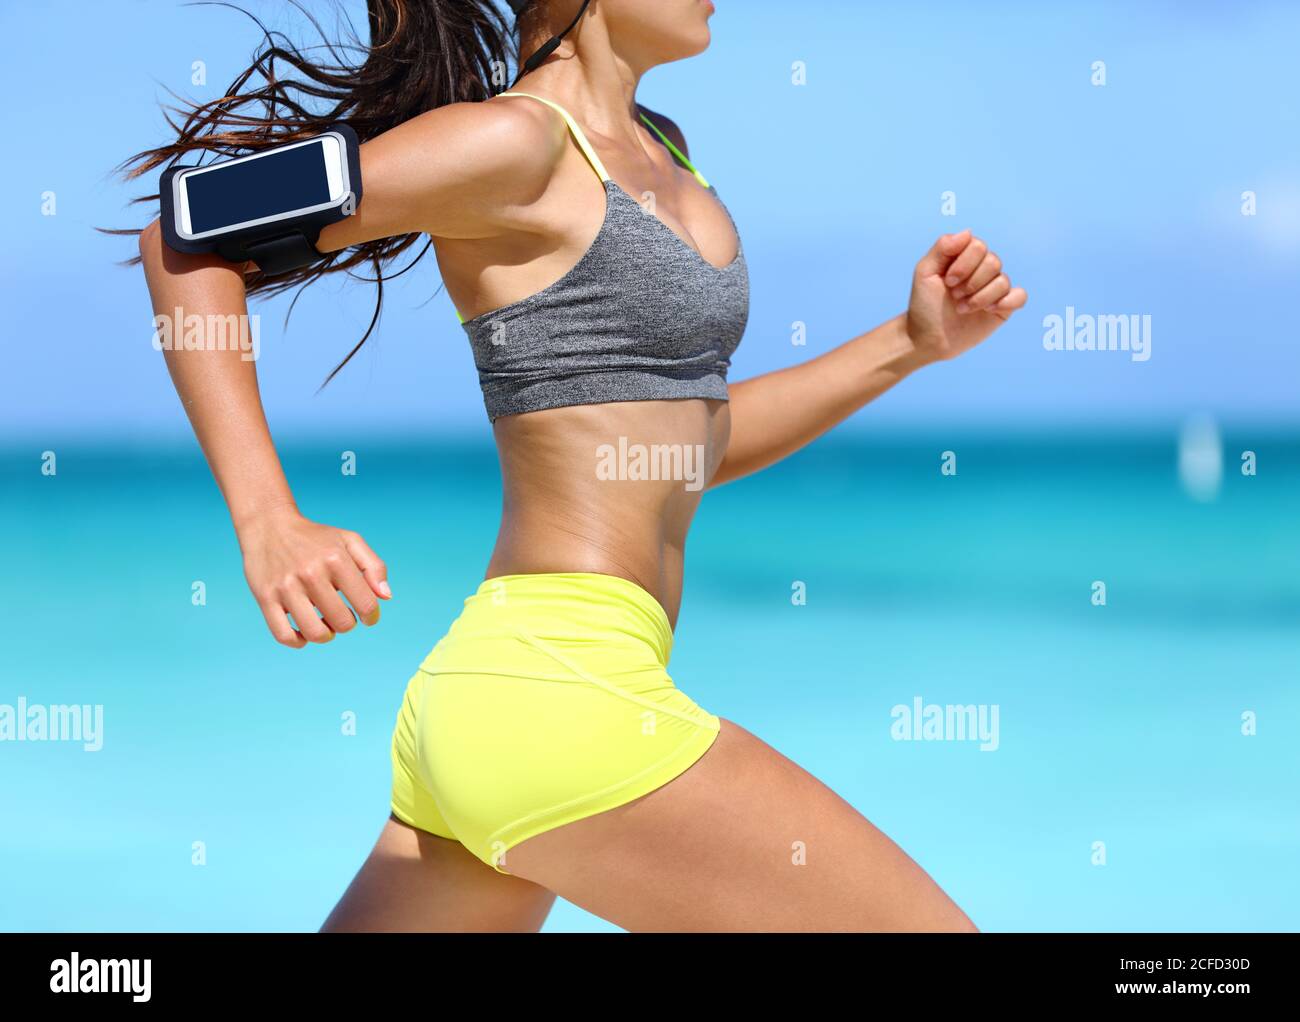 Fitness athlete woman running fast with speed wearing phone armband with touchscreen. Midsection crop showing muscular legs and thighs training glutes Stock Photo